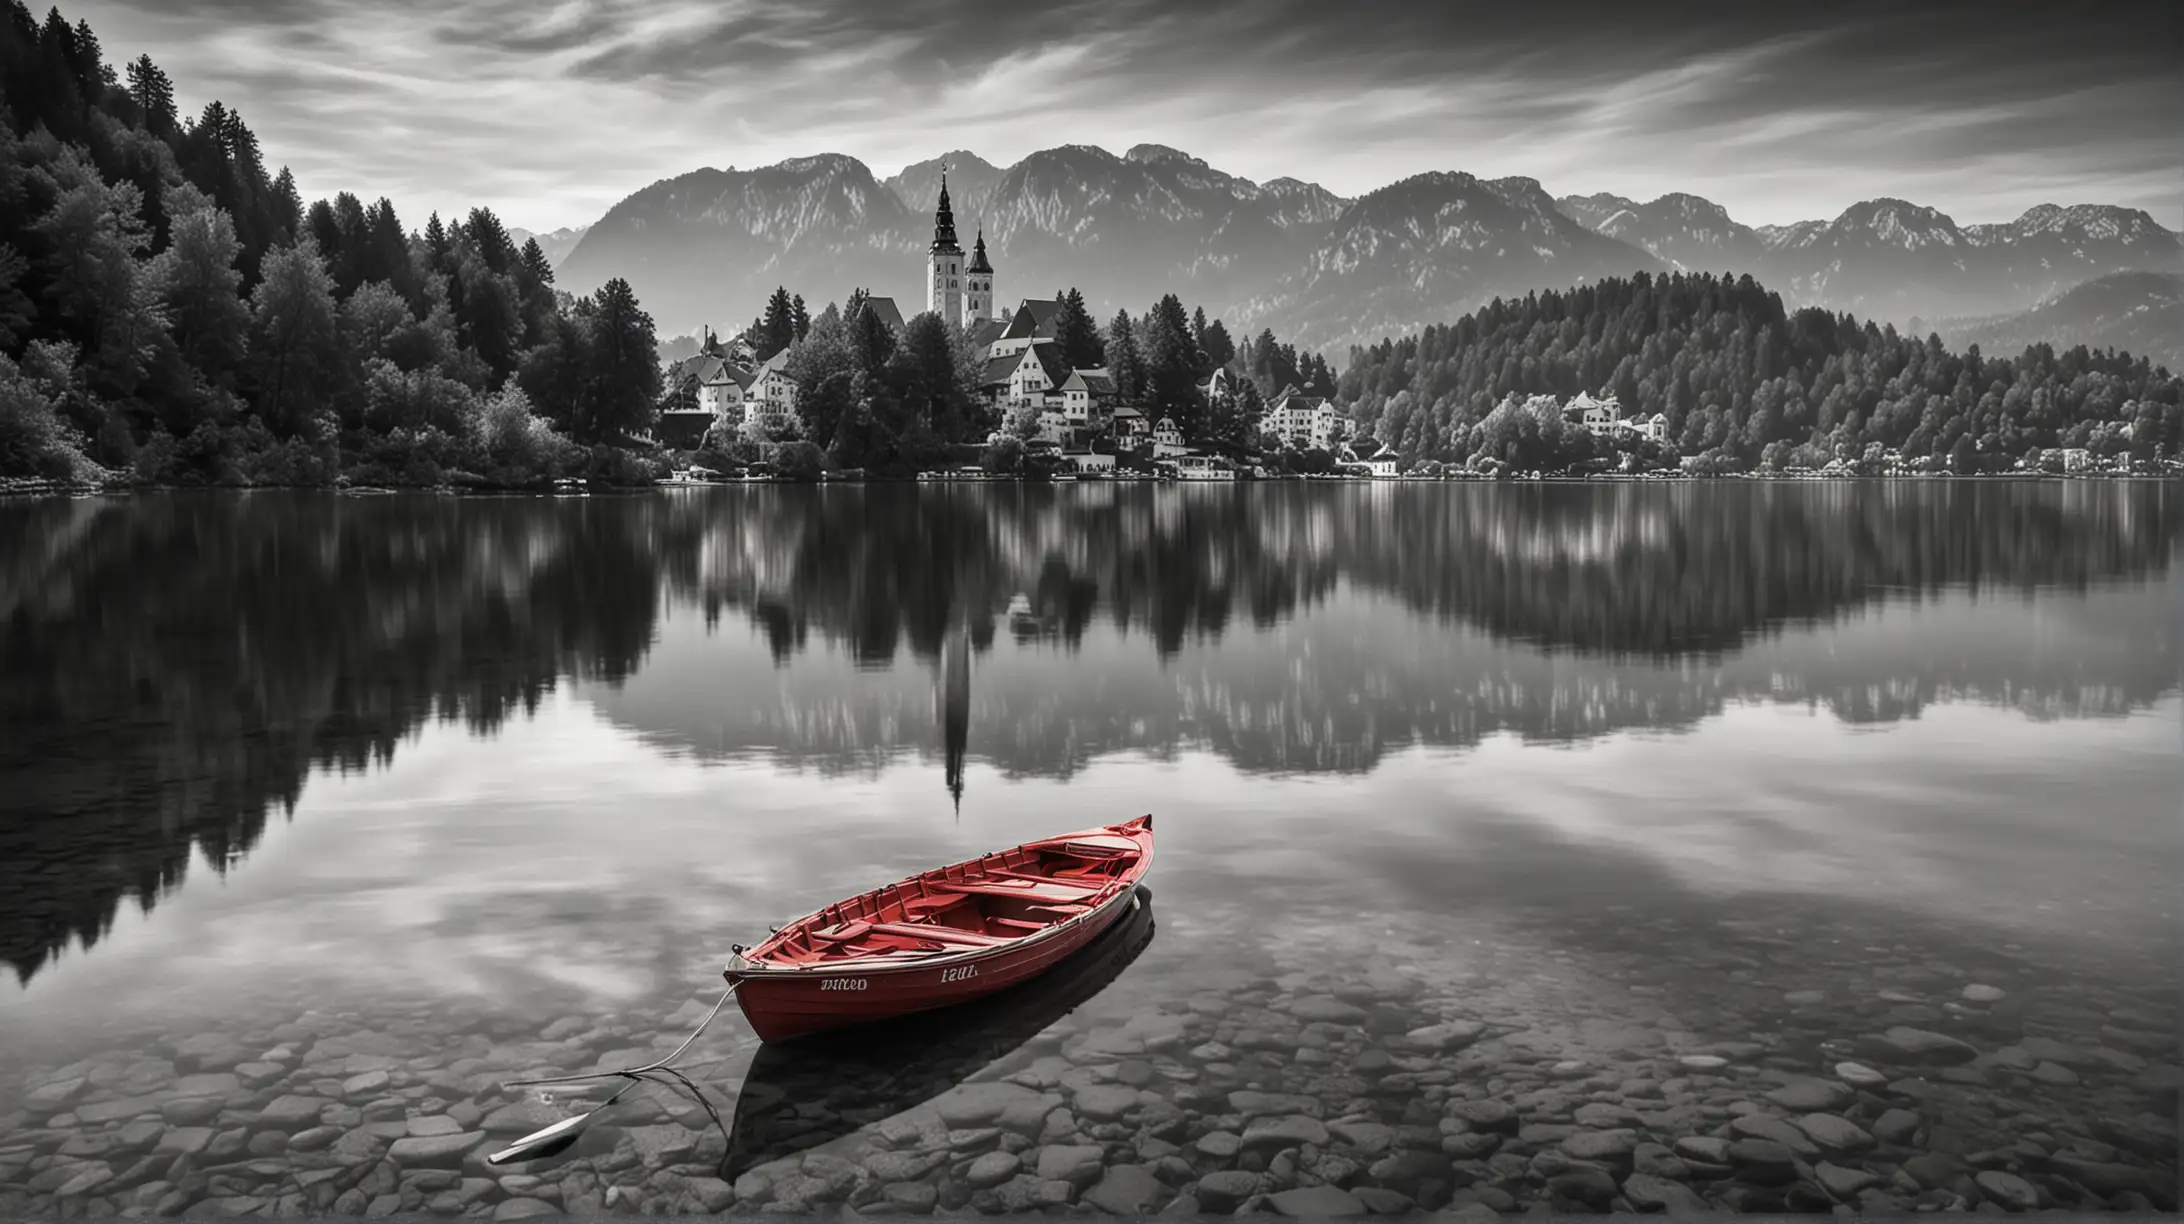 Create monochrome images of lake Bled that highlight a boat with red